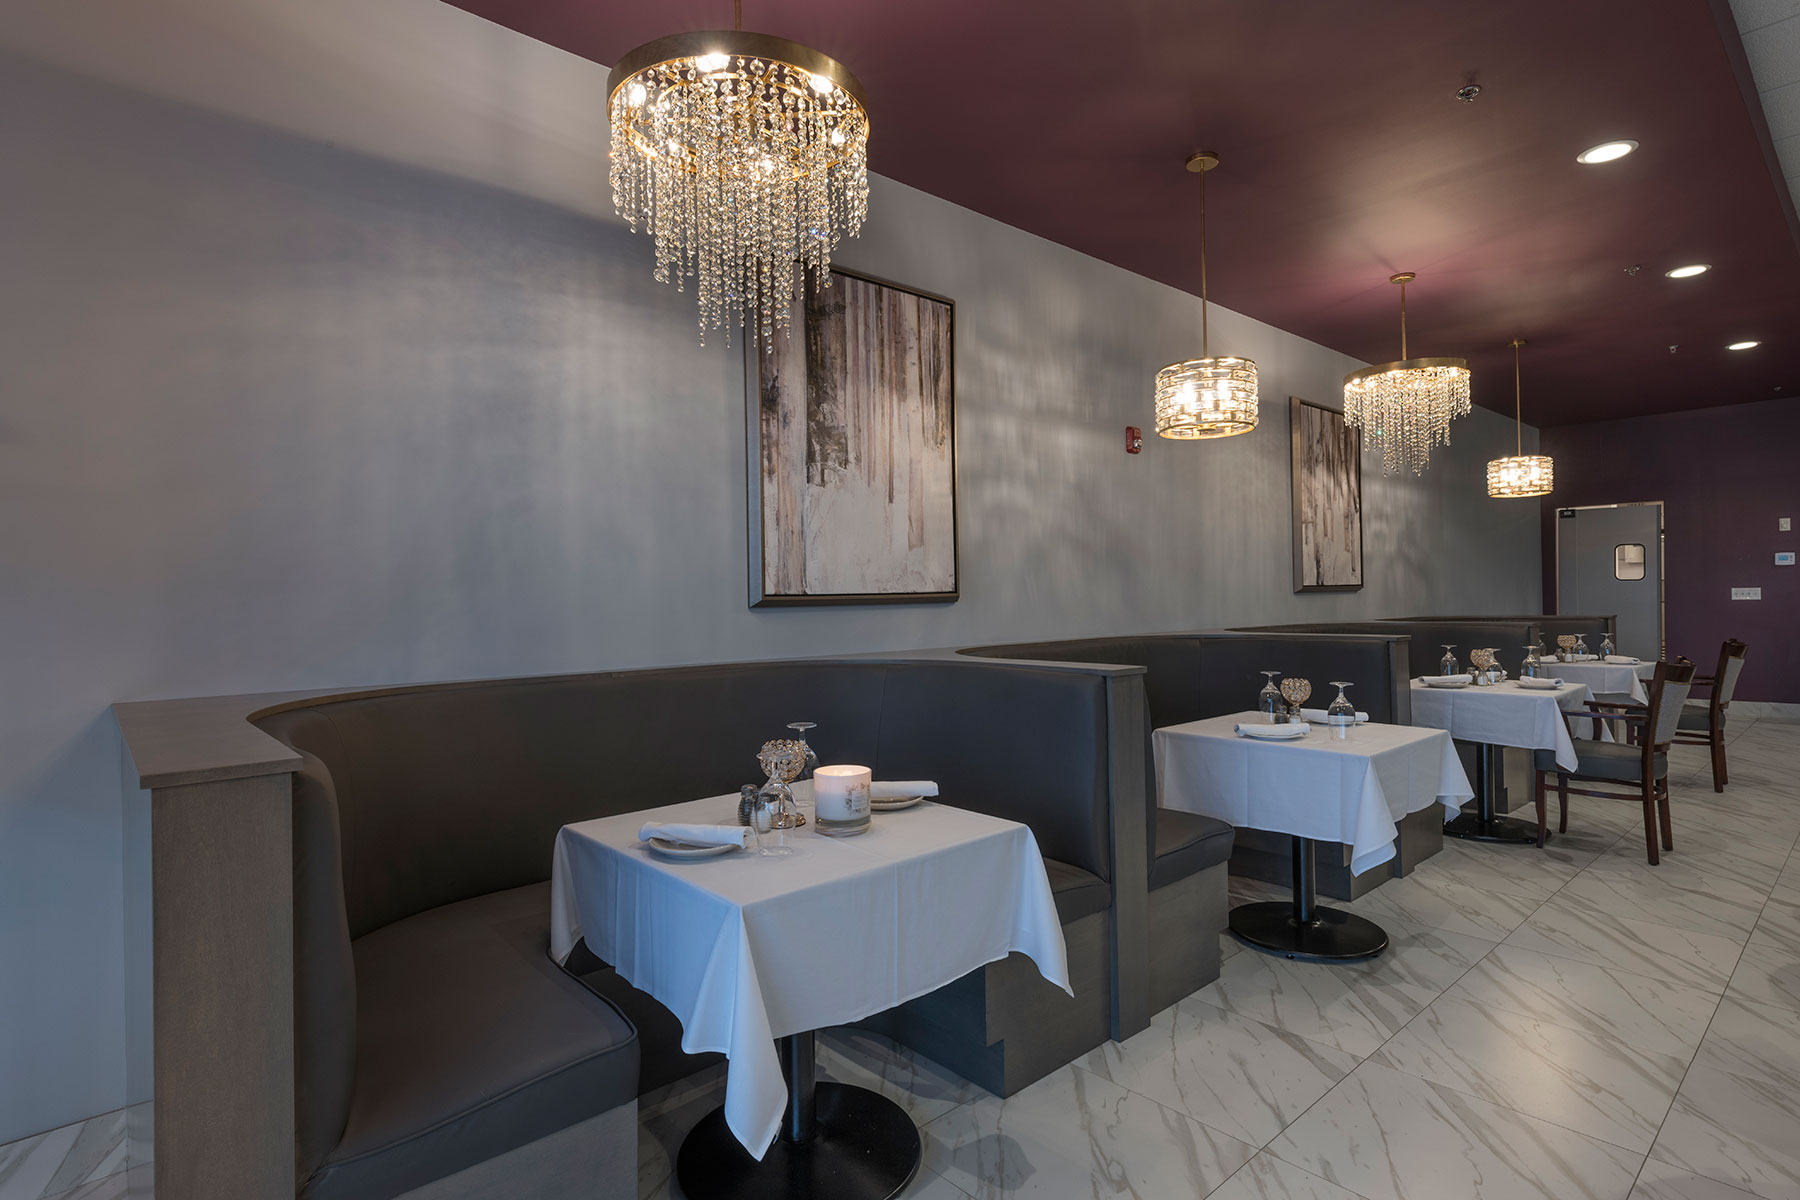 Restaurant seating booths - Four Seasons Steak & Grill Restaurant, Addison Custom Home. America's Custom Home Builders: New Construction, Remodeling, Restoration Services. Residential and Commercial.